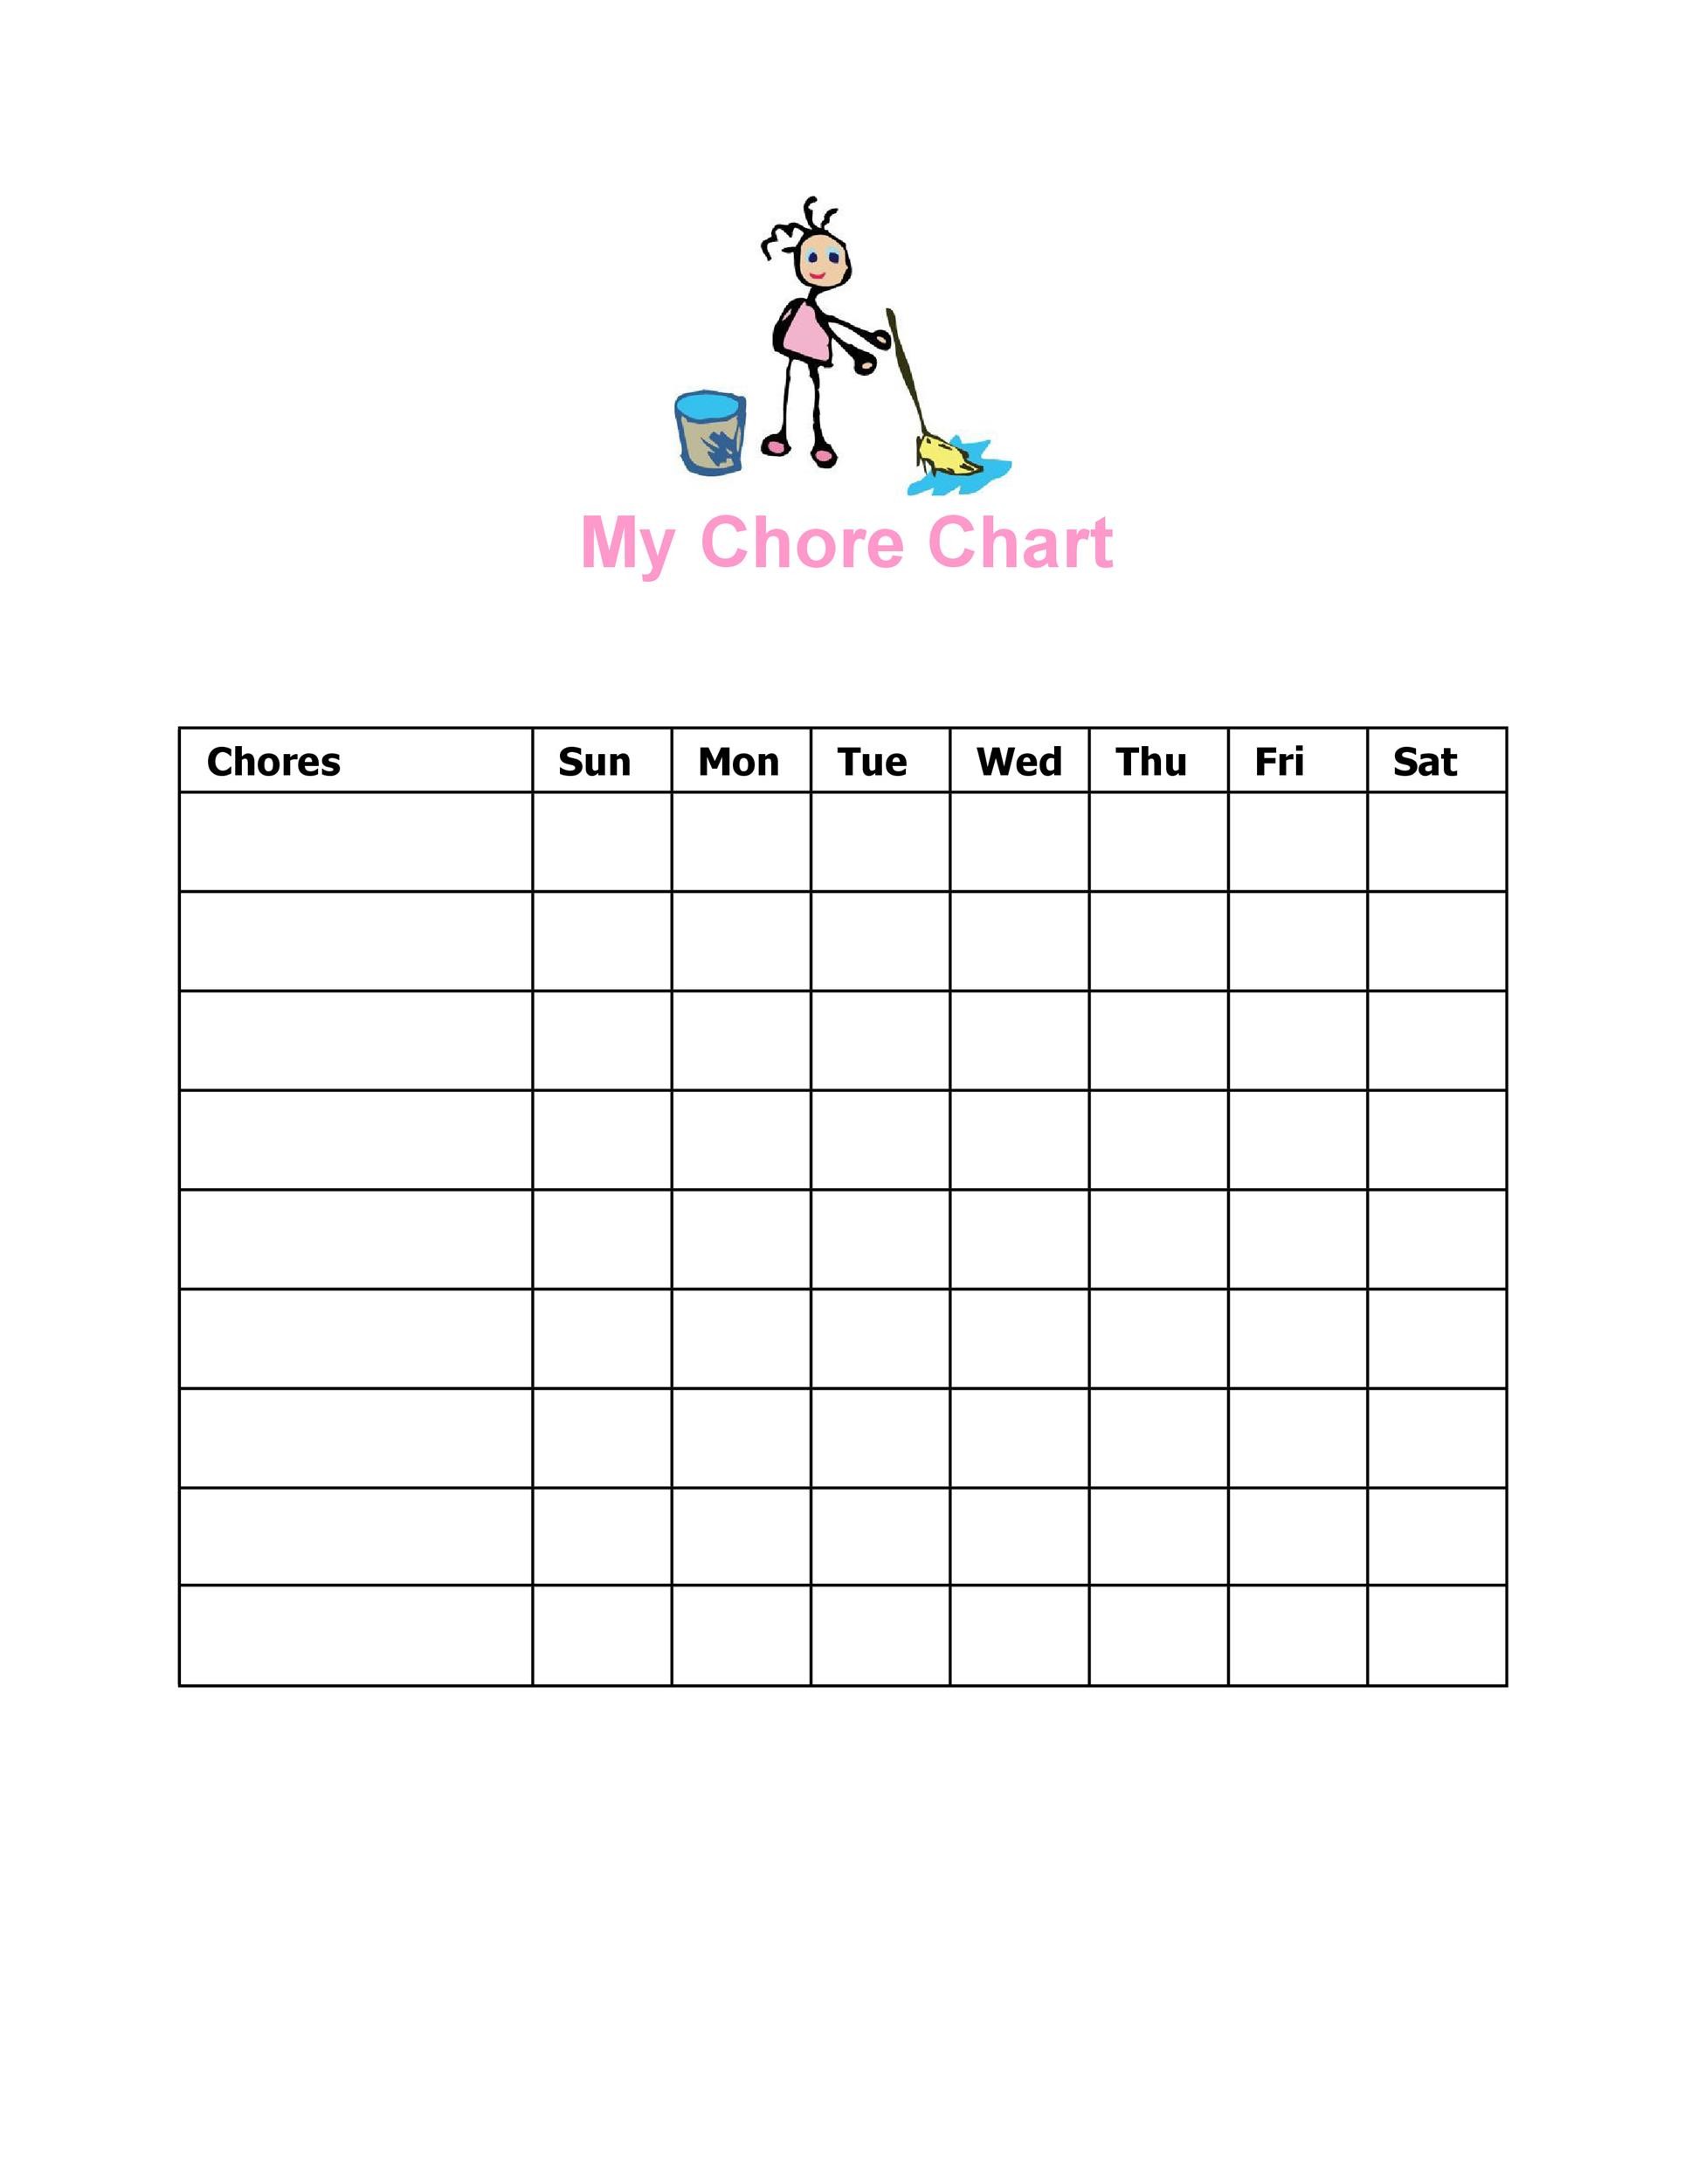 46 FREE Chore Chart Templates for Kids ᐅ TemplateLab